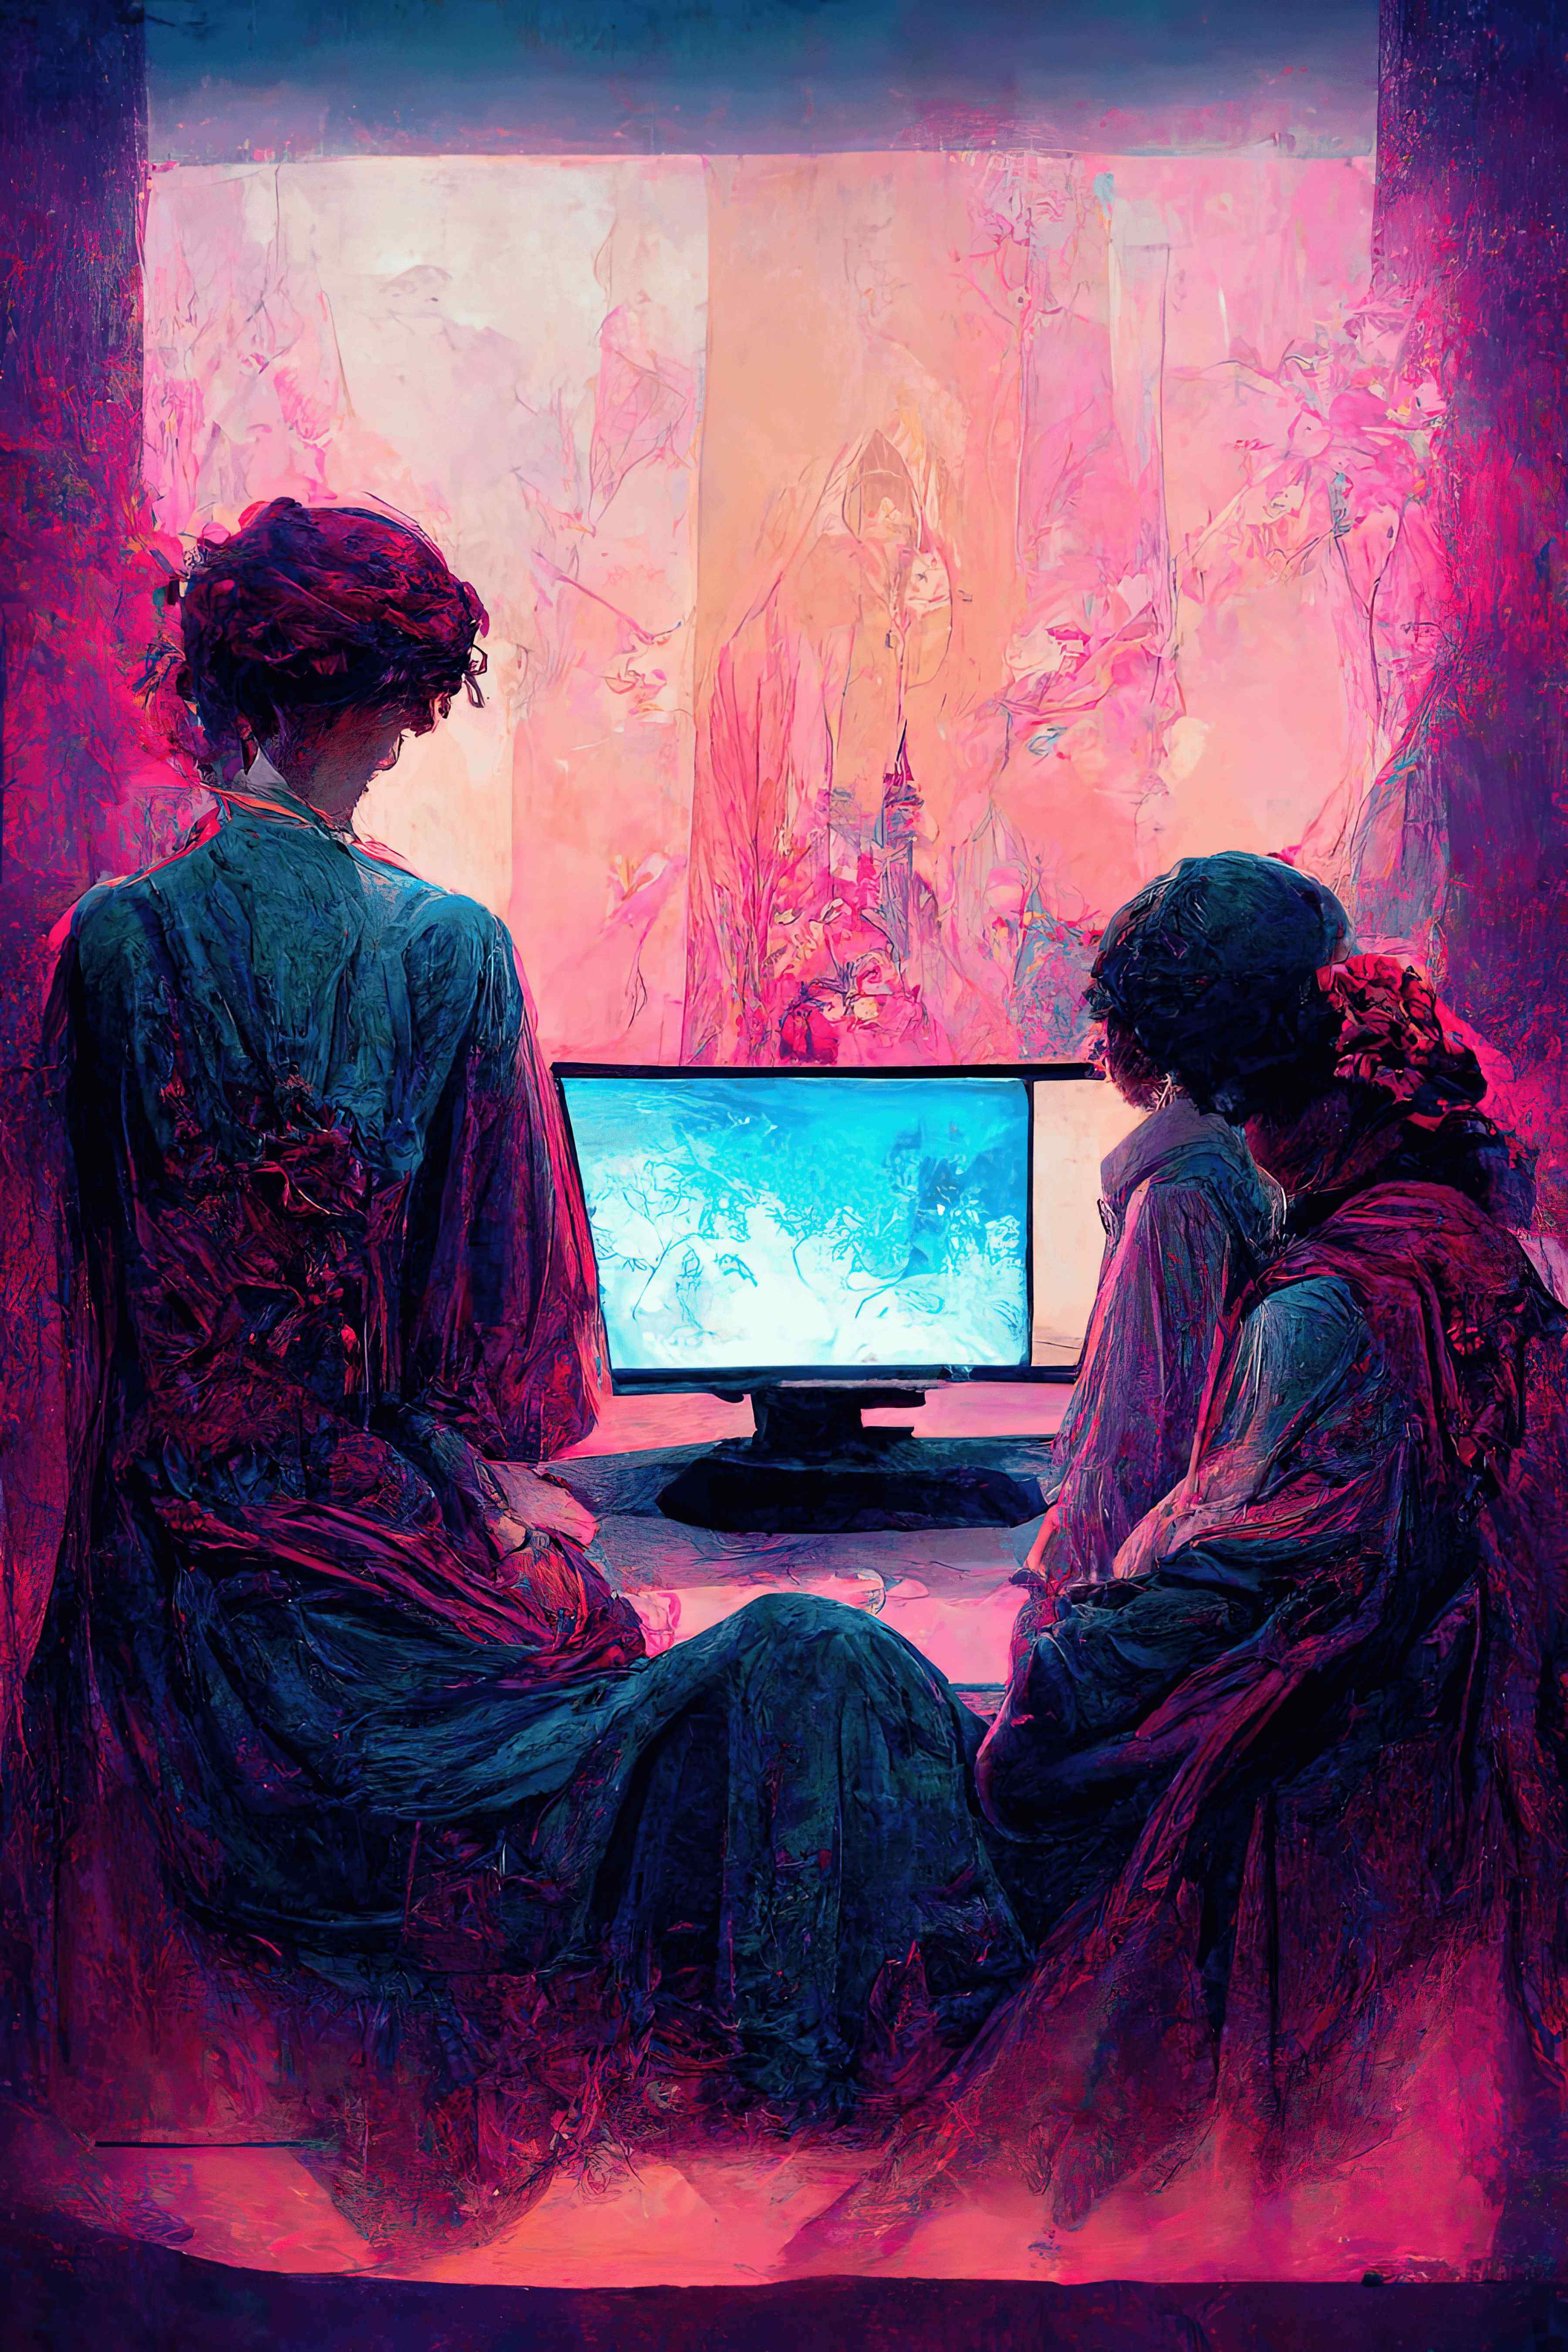 A painterly illustration of two people looking at a pair of monitors. The screens glow vibrant icy blue. We see the two people from behind; the one on the left is standing, and the one on the right is sitting. Strokes of vibrant abstract color illuminate the darker silhouettes in the background. The background is light pink and magenta. 